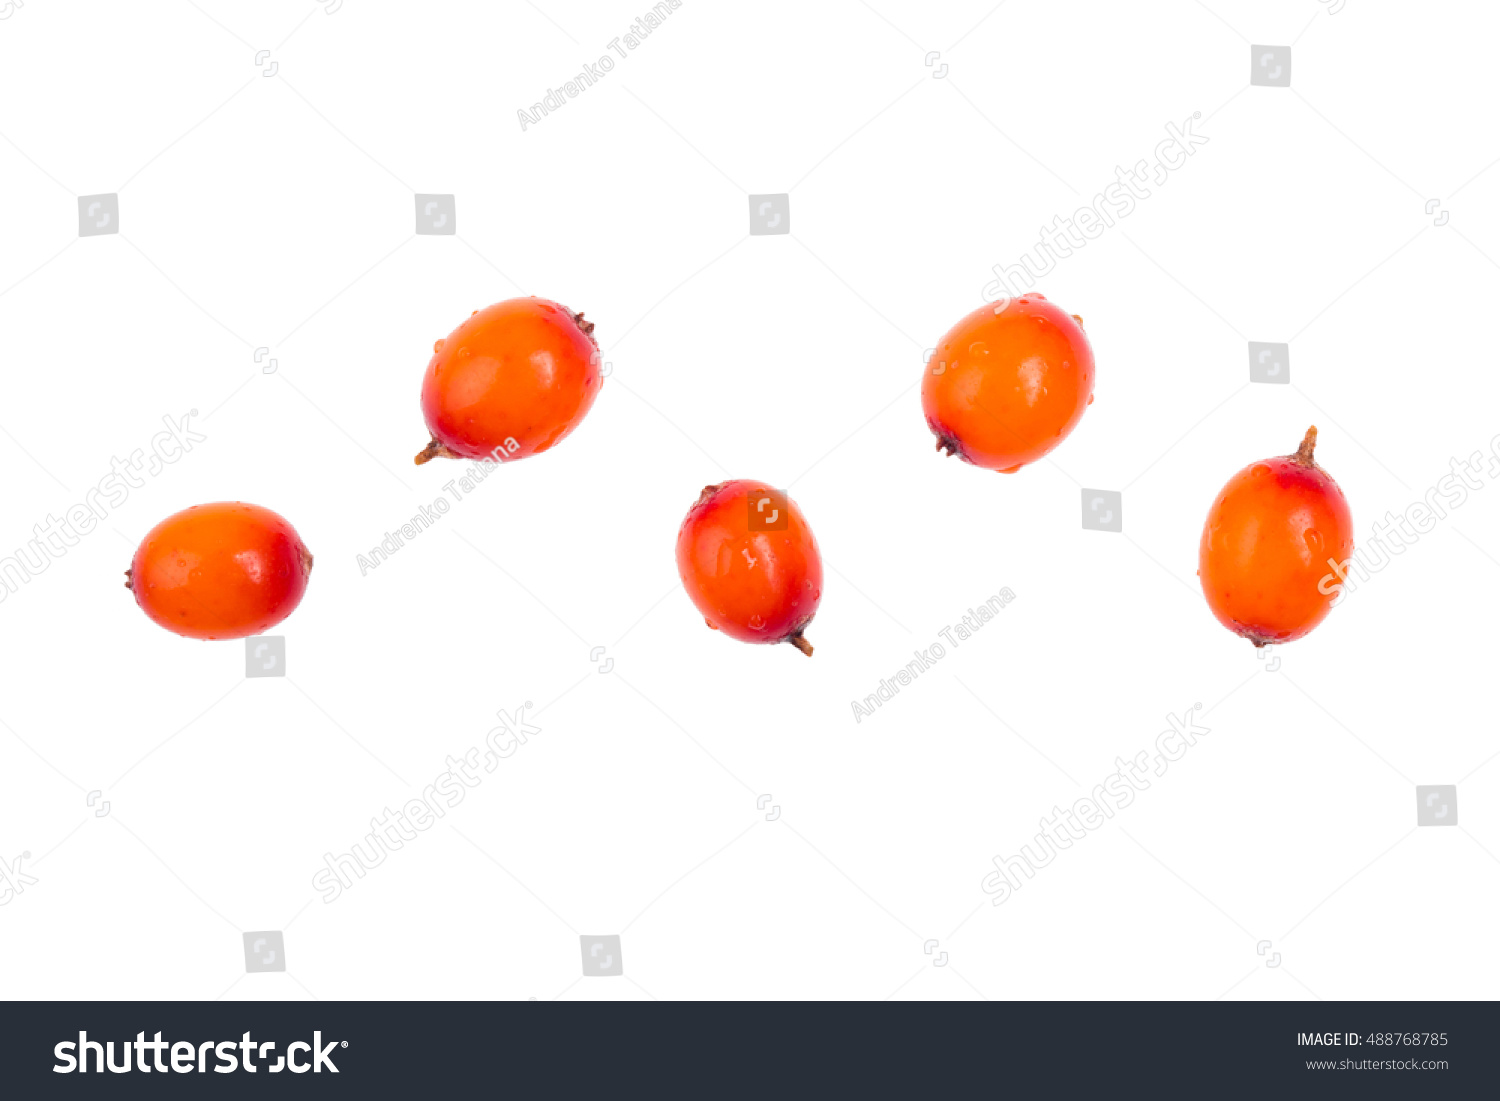 Five juicy berries are delicious fresh alaihi on white background isolated. #488768785